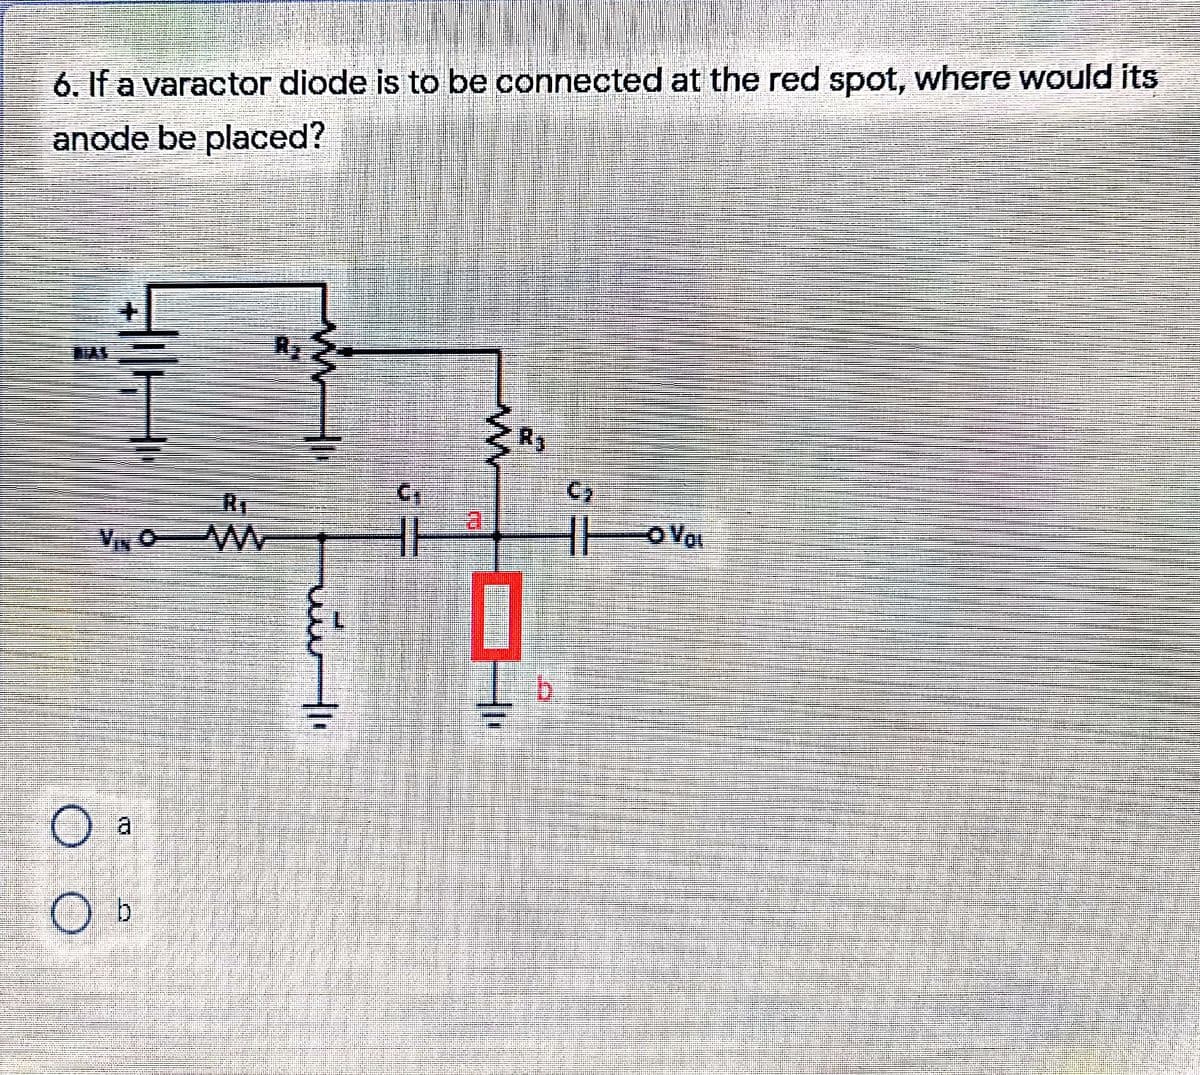 6. If a varactor diode is to be connected at the red spot, where would its
anode be placed?
C2
V, O W
TO Vai
b.
O a
